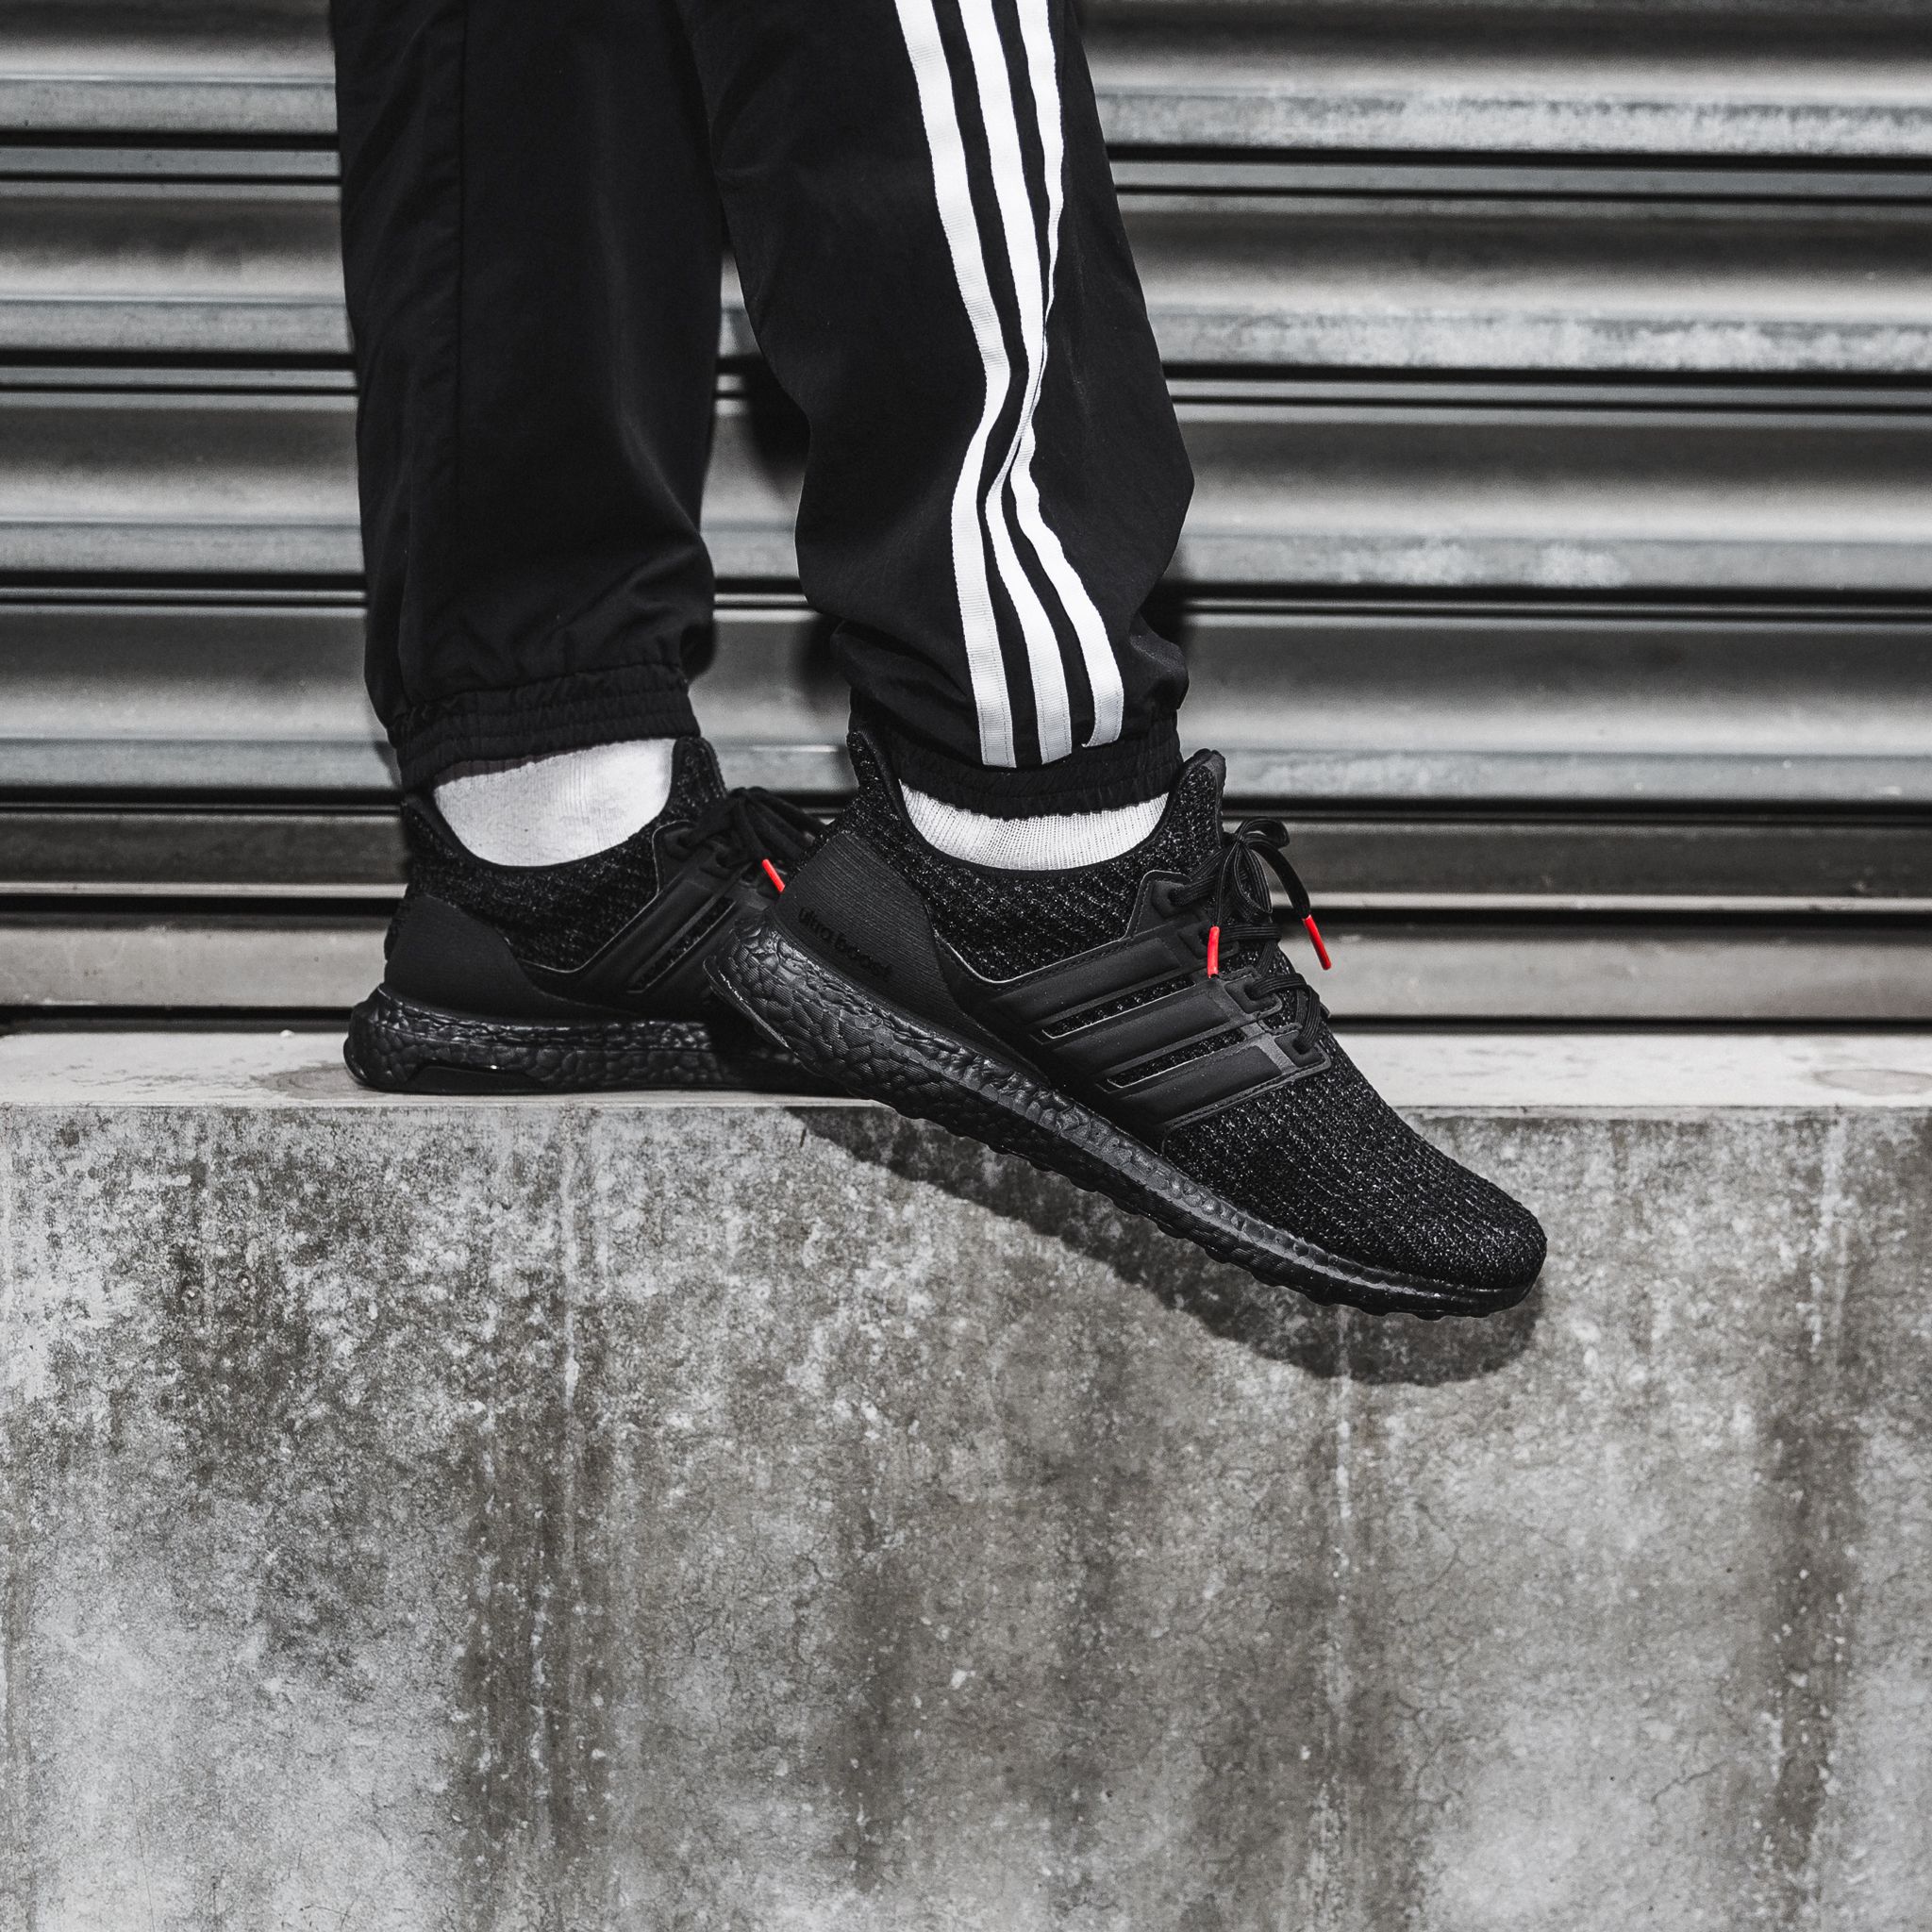 Titolo on Twitter: "new 1 on SALE! Adidas UltraBoost 4.0 - Core Black-Active Red shop right HERE ❗ https://t.co/7DSxuYZh6U #adidas #ultraboost #ultraboost4 #ub #black #sale #sales #wintersale #adidasultraboost #style #sneakers https://t.co ...